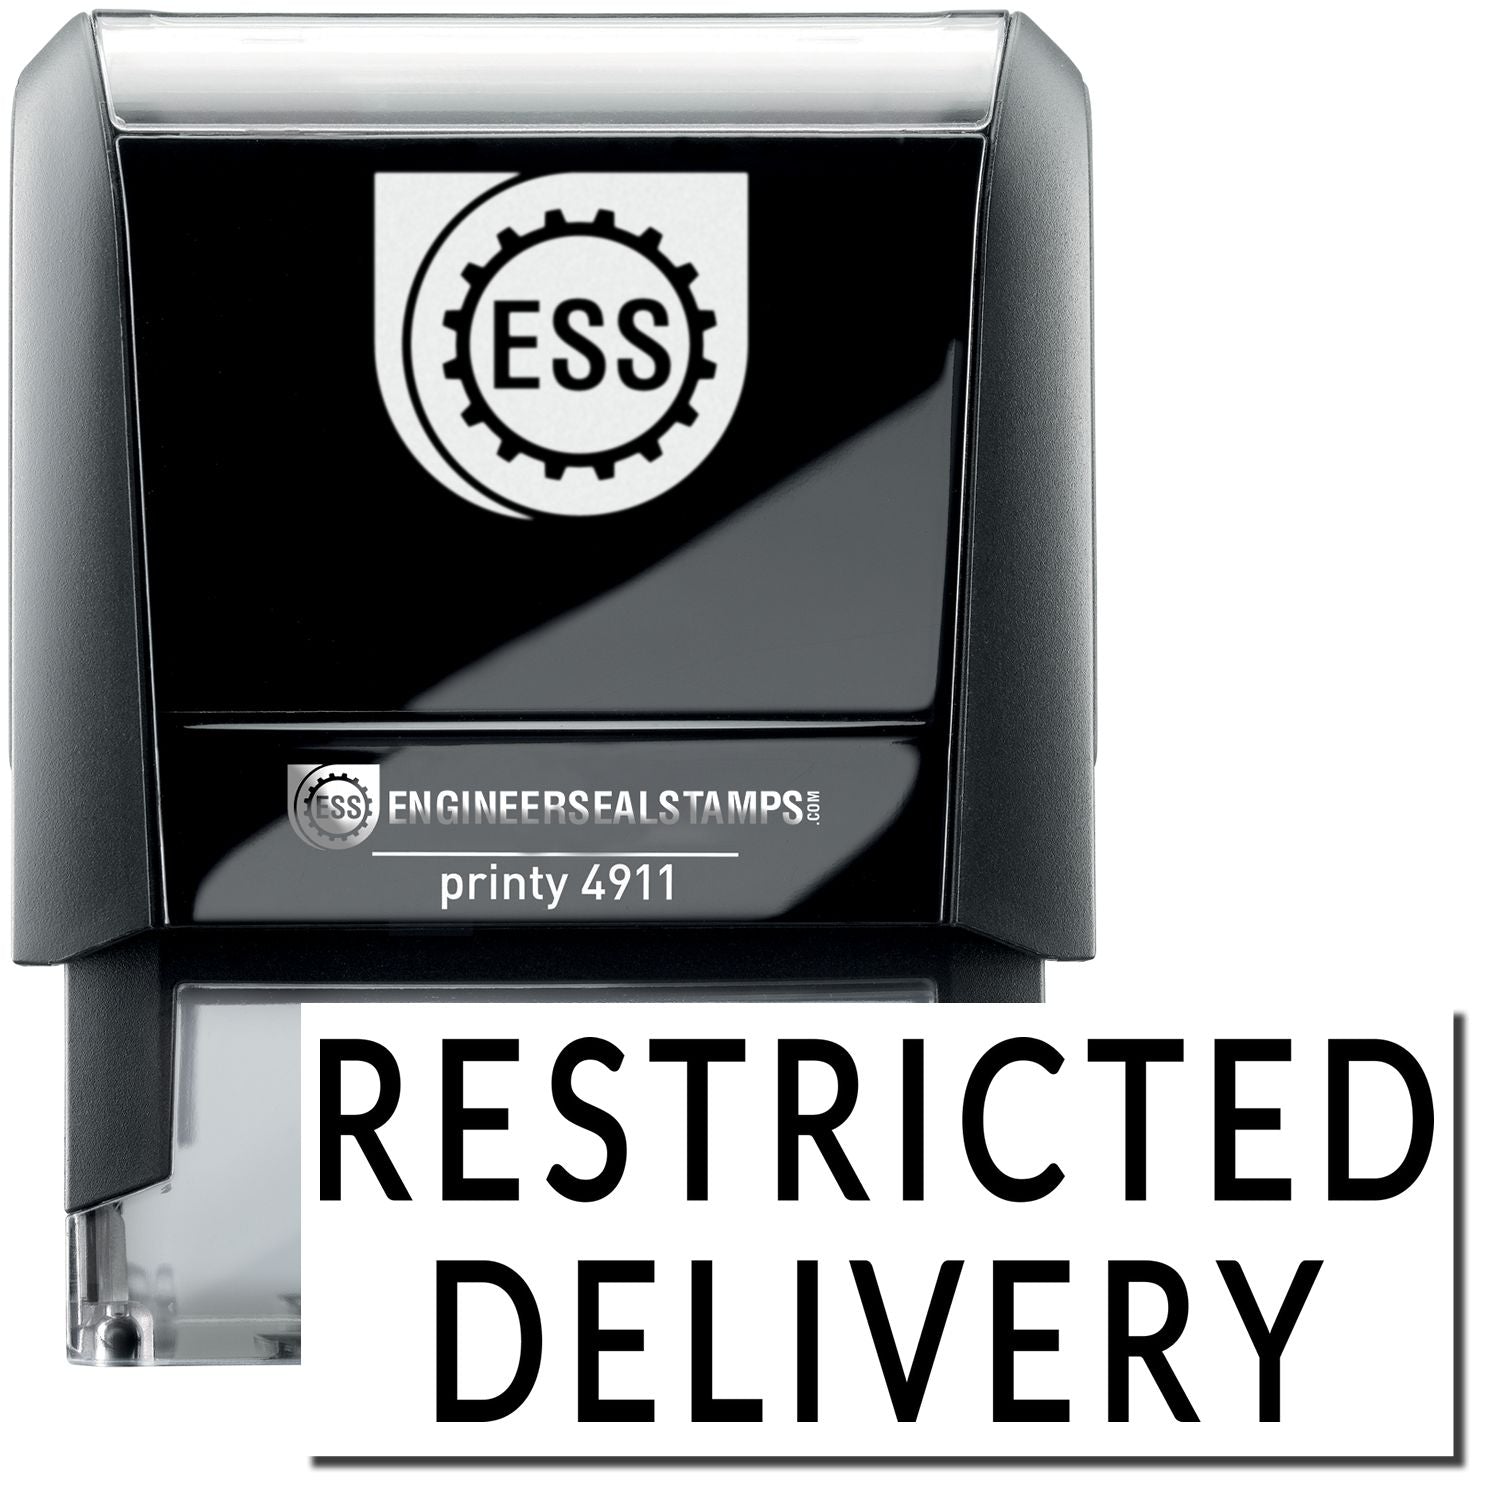 A self-inking stamp with a stamped image showing how the text "RESTRICTED DELIVERY" is displayed after stamping.